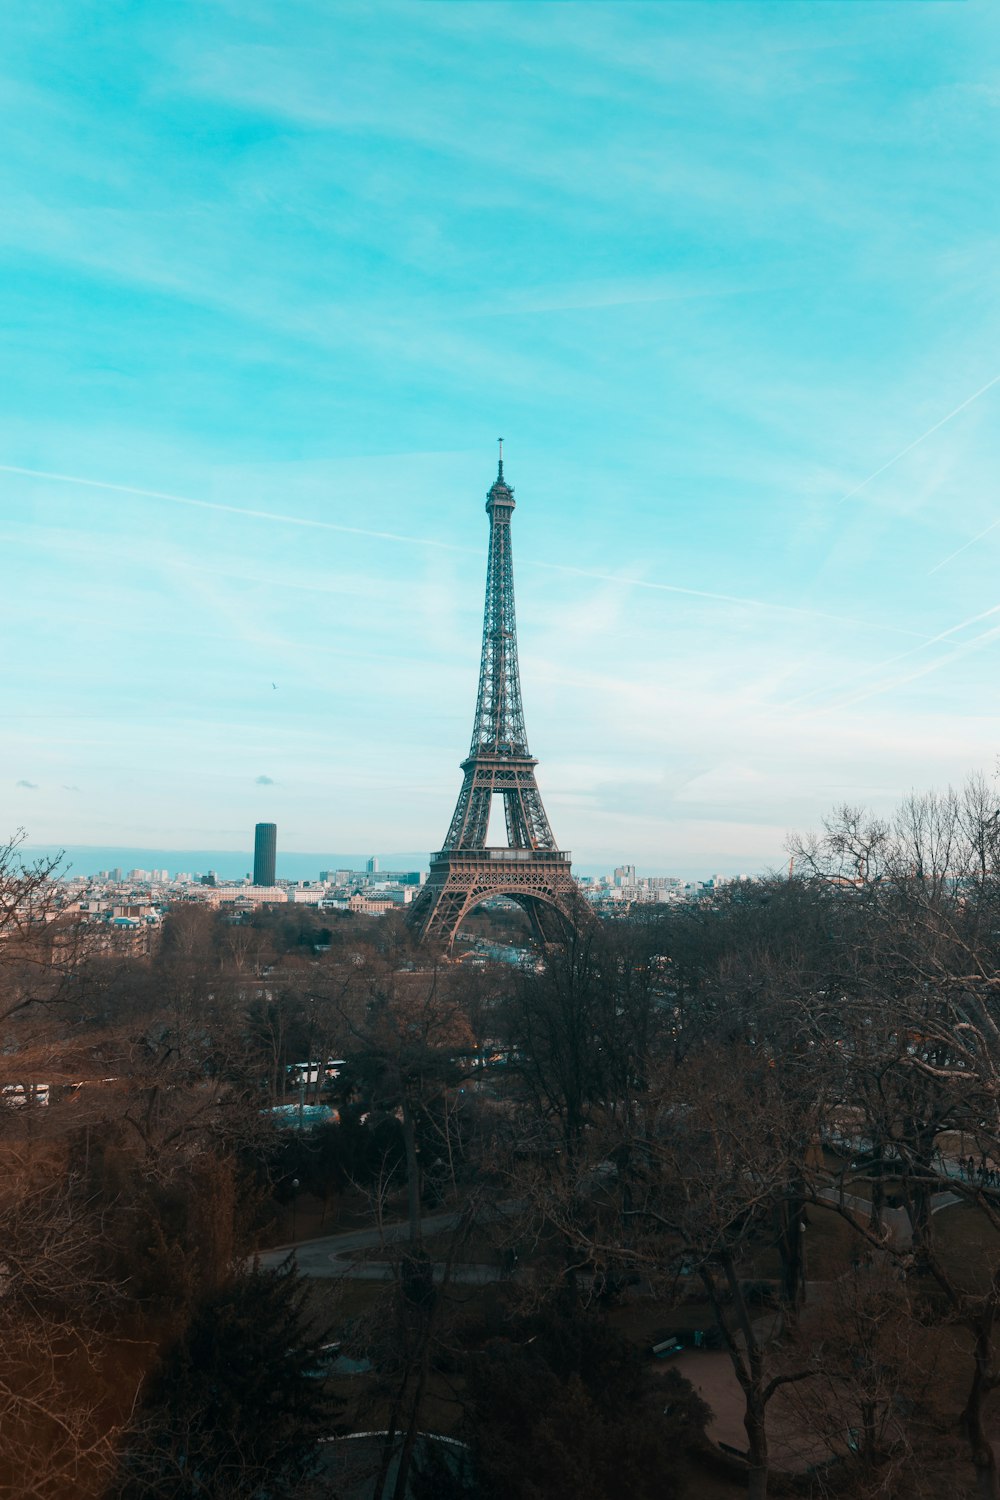 Eiffel tower view during daytime